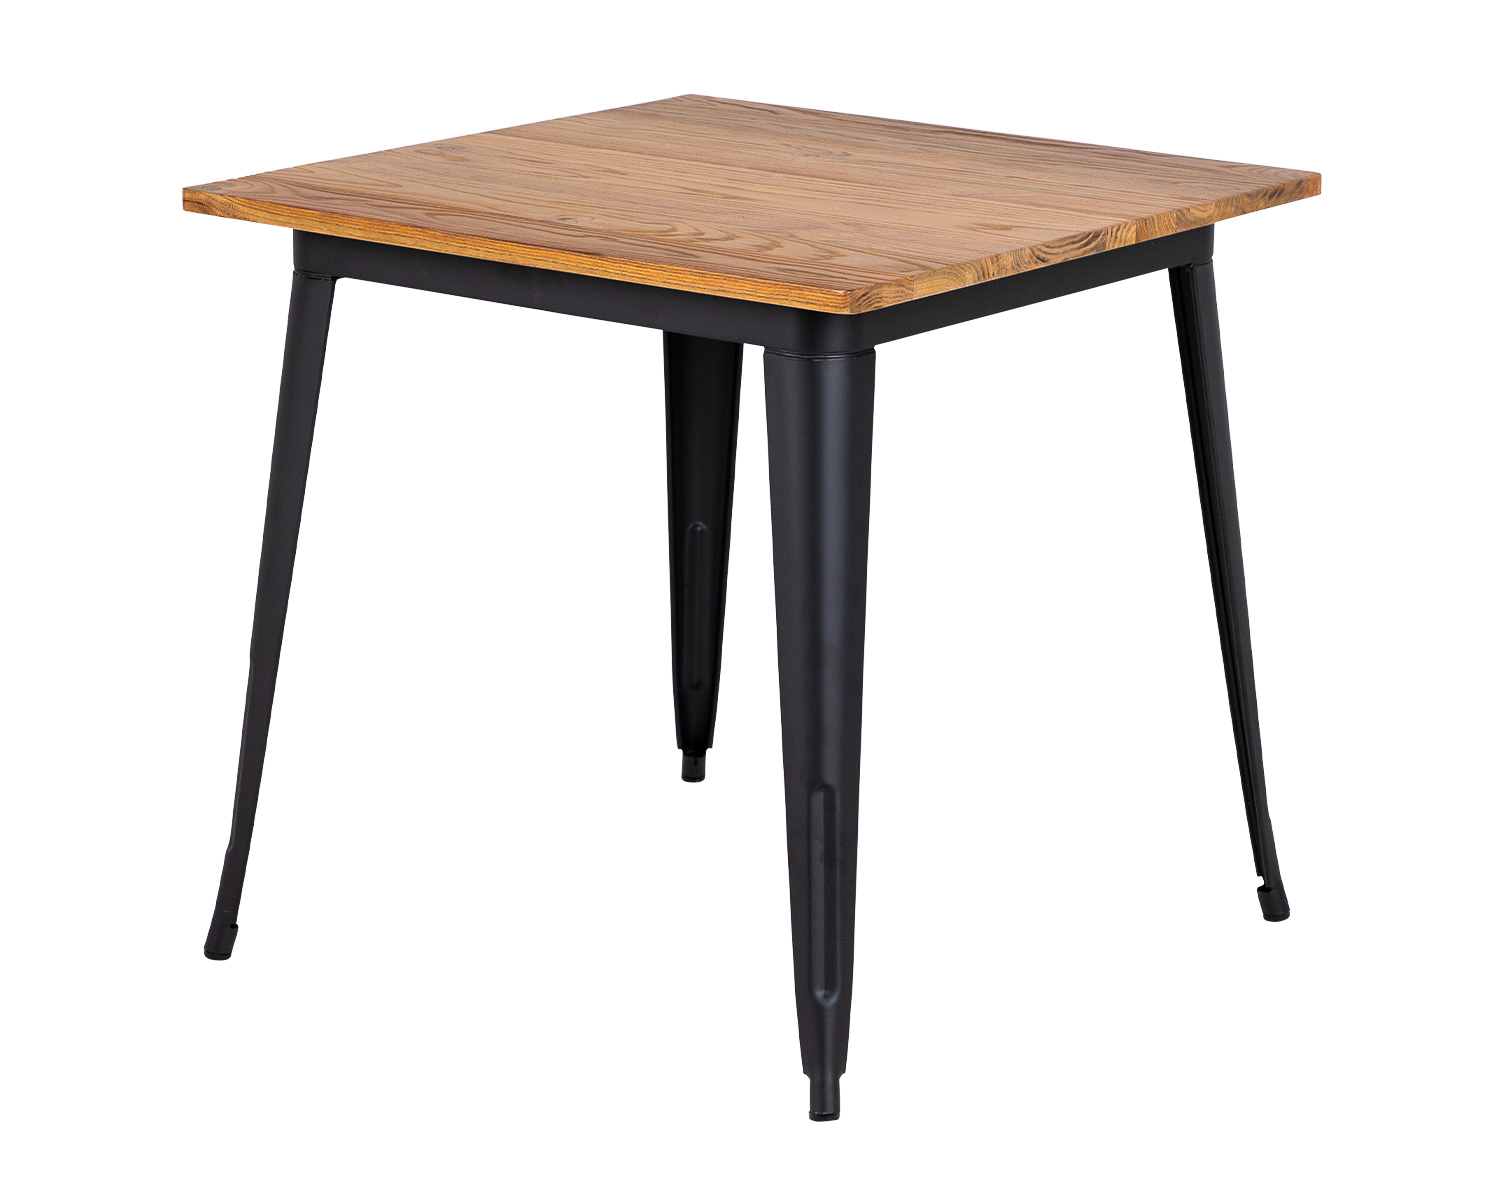 Tolix Style Square Dining Table in Black Matte with Natural Elm Top